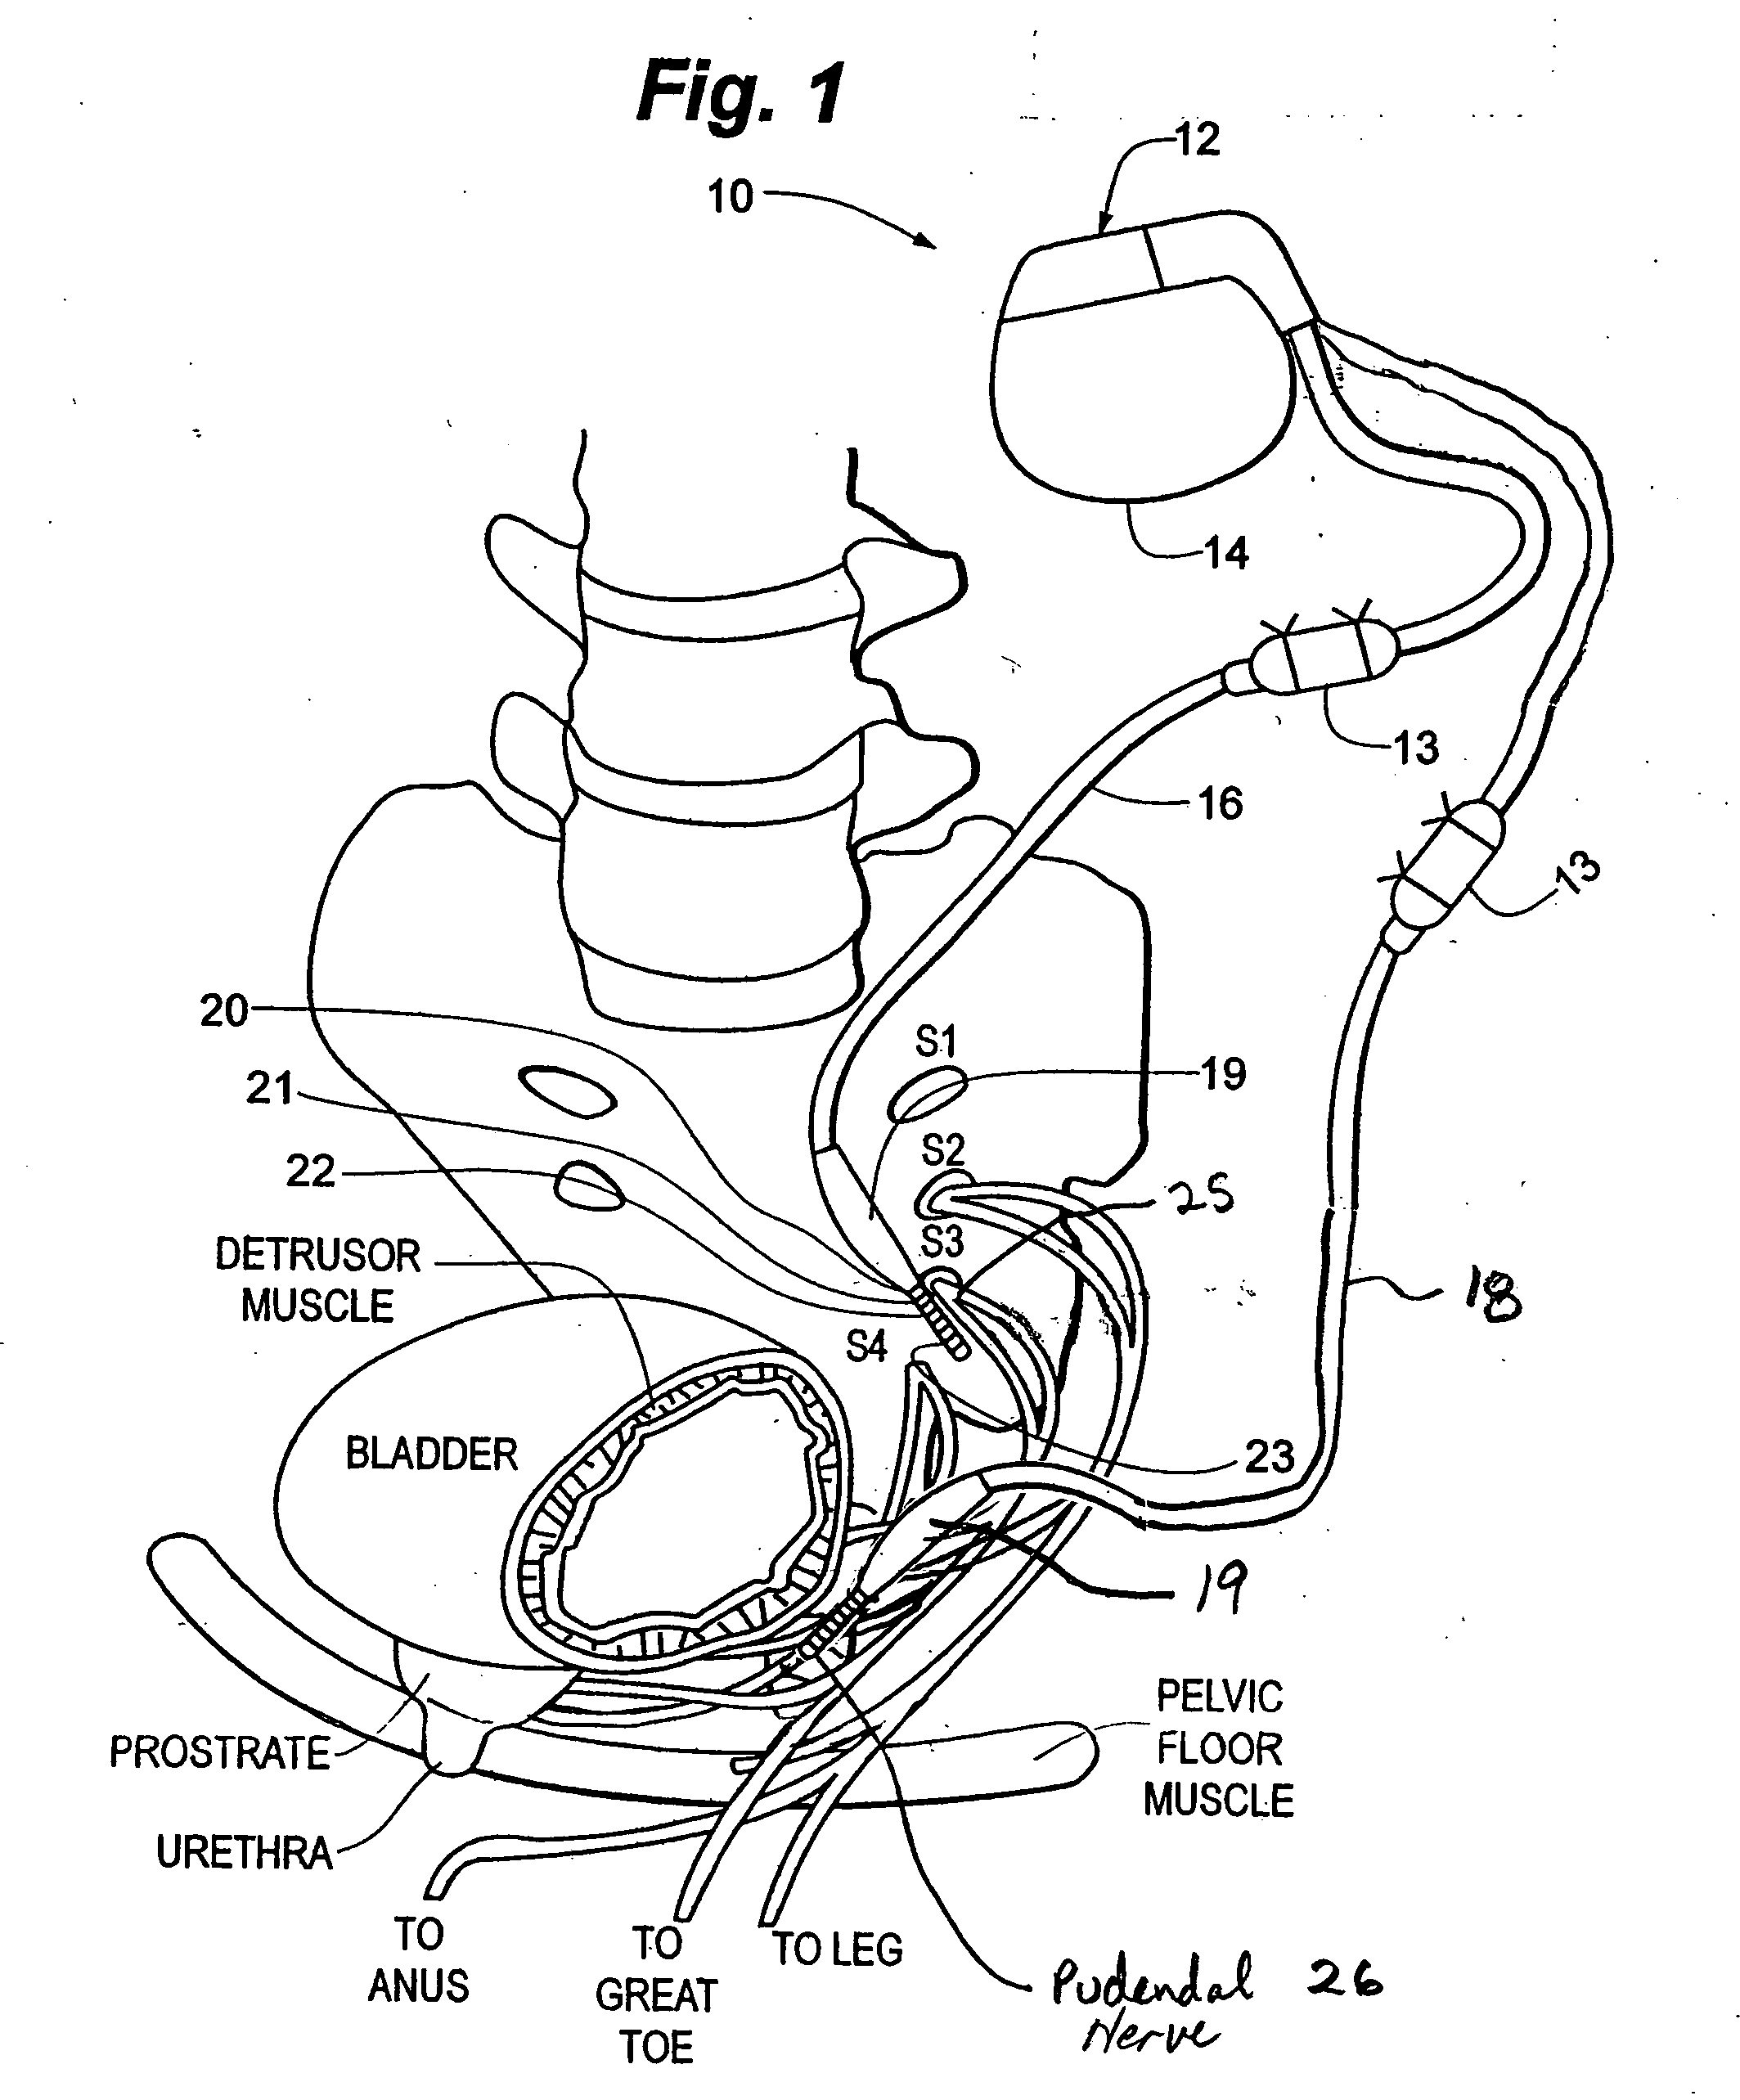 Method, system and device for treating various disorders of the pelvic floor by electrical stimulation of the pudendal nerves and the sacral nerves at different sites